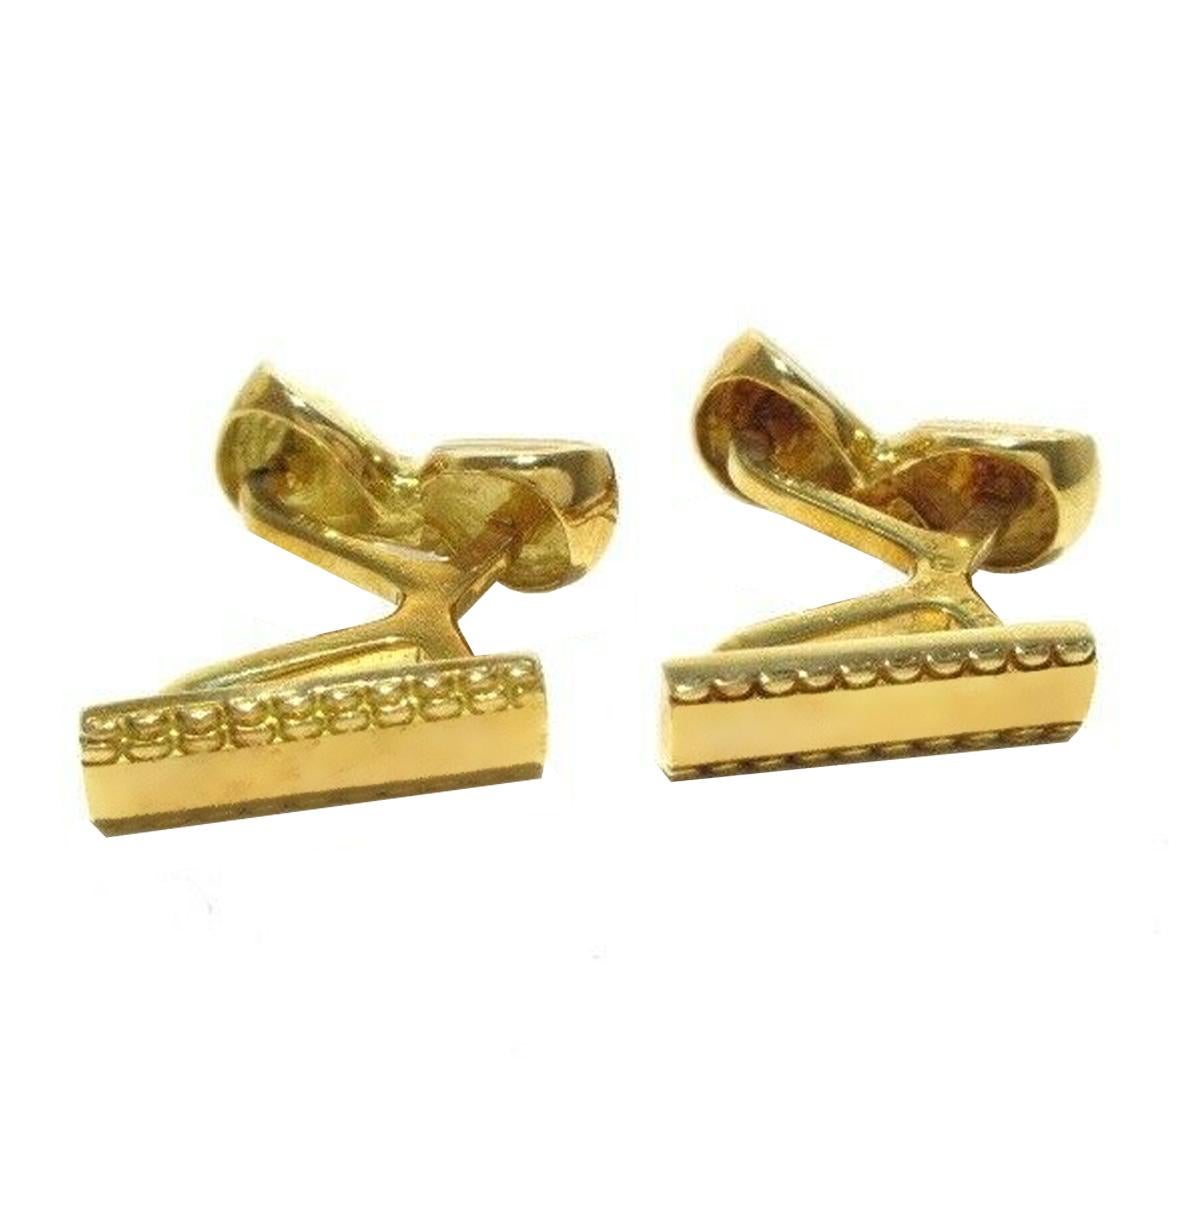 A fabulous pair of Hermes Paris yellow gold cuff links crafted in 18k yellow gold. The cuff links have a weight of 15.8 grams.